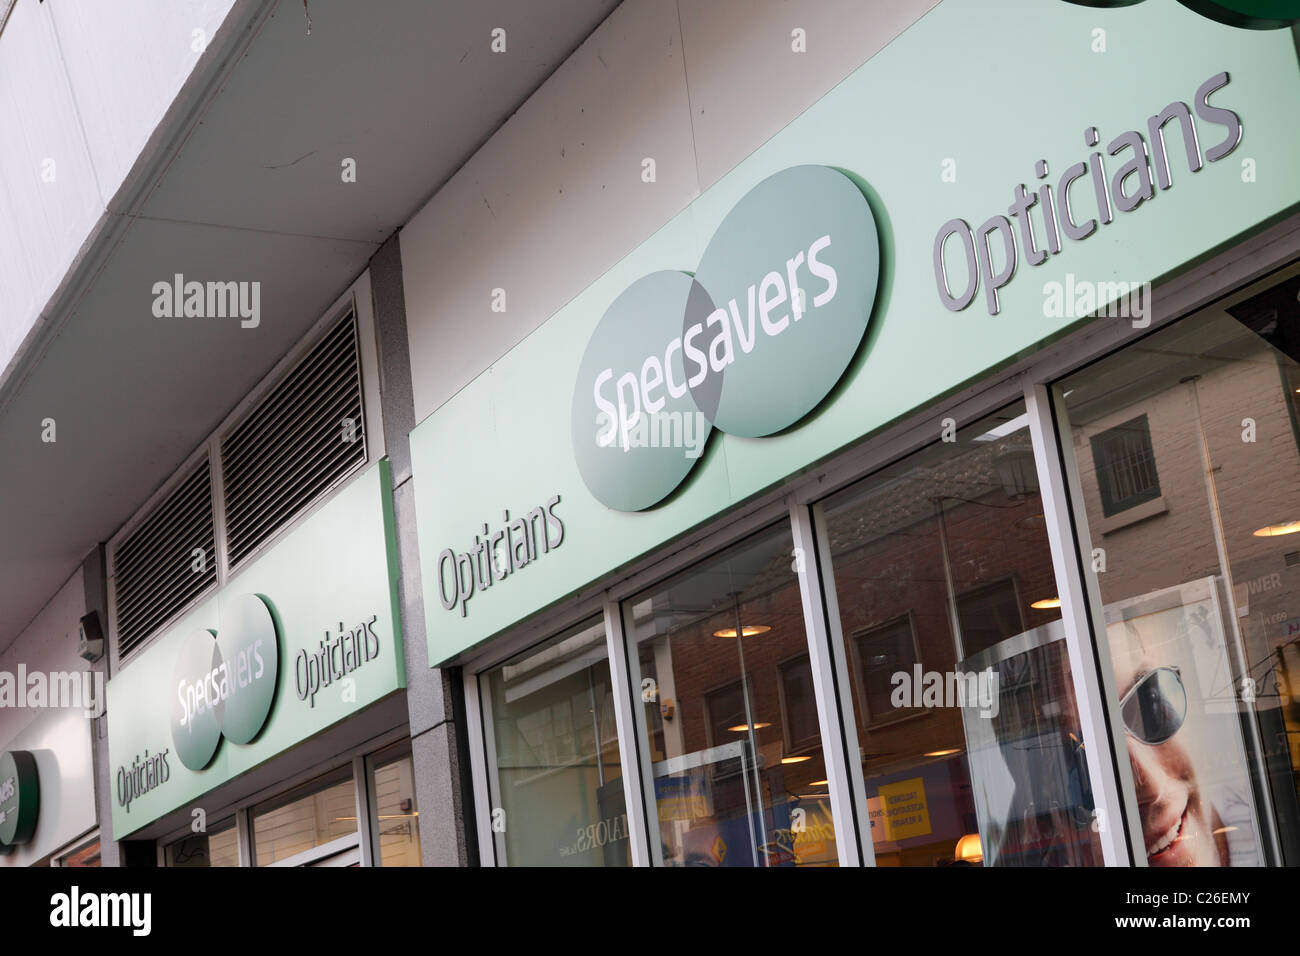 Specsavers Opticians, situated here in Claremont Street, Shrewsbury, England. Stock Photo